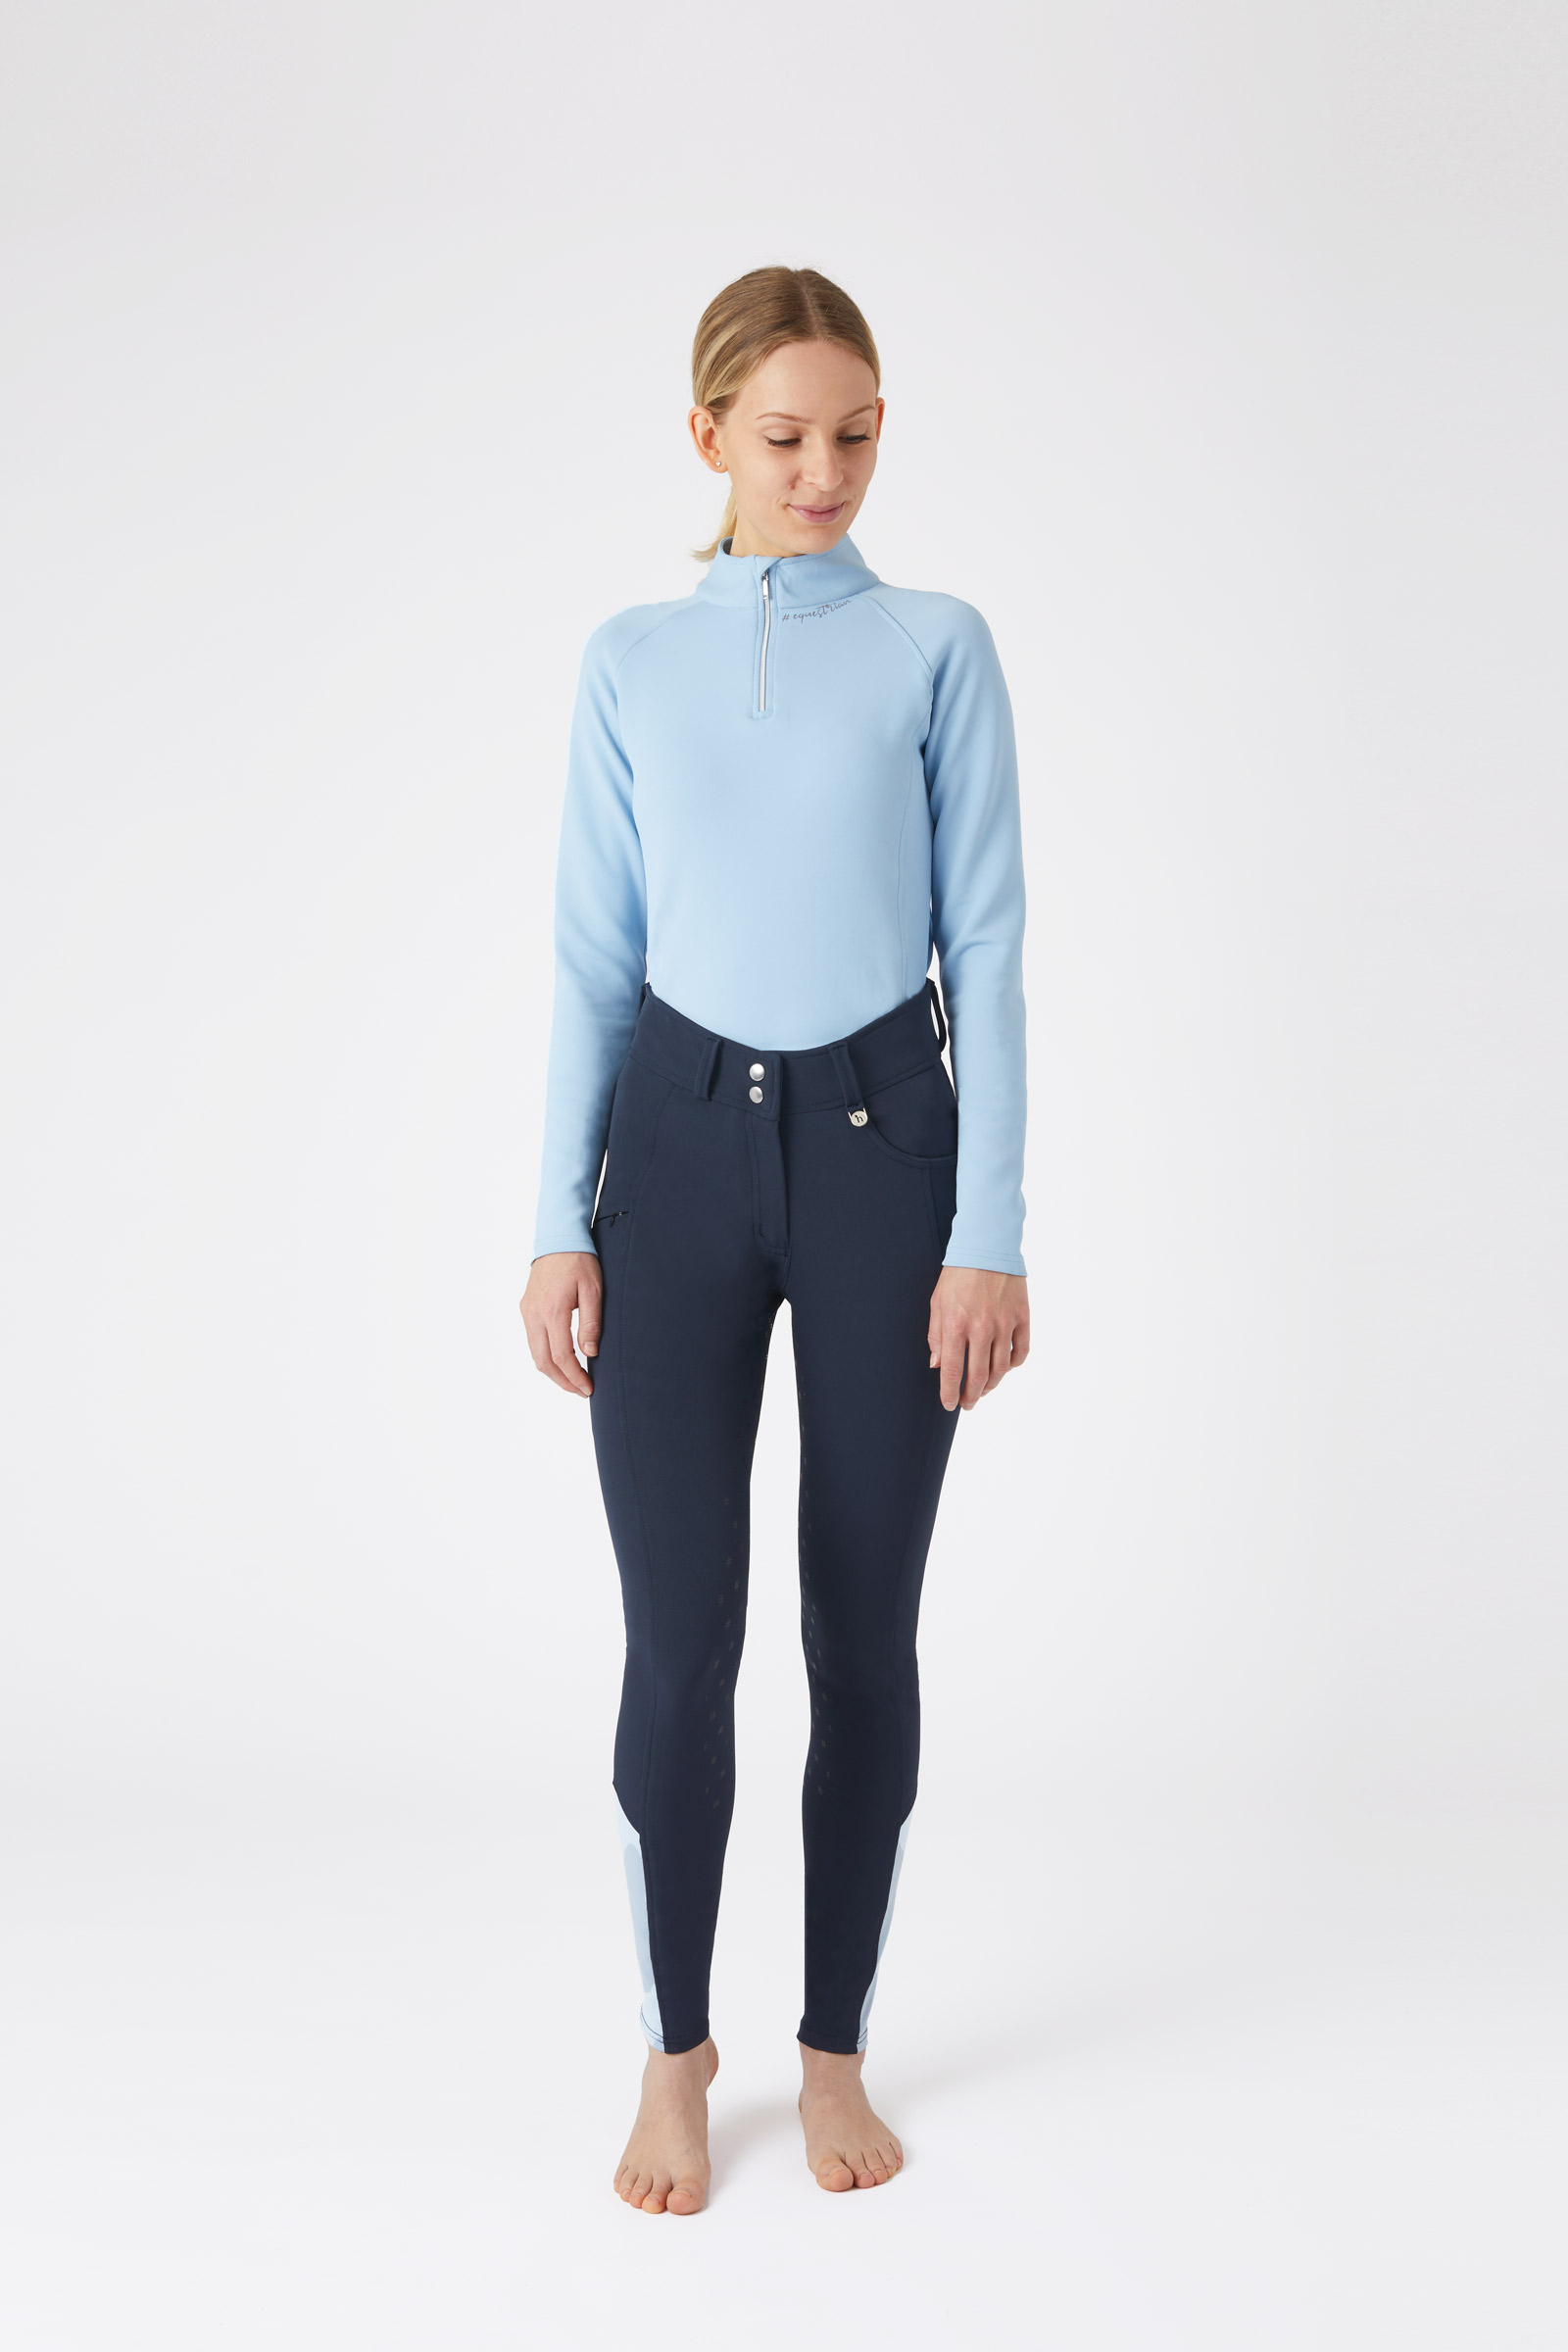 Buy affordable Full Seat Breeches now